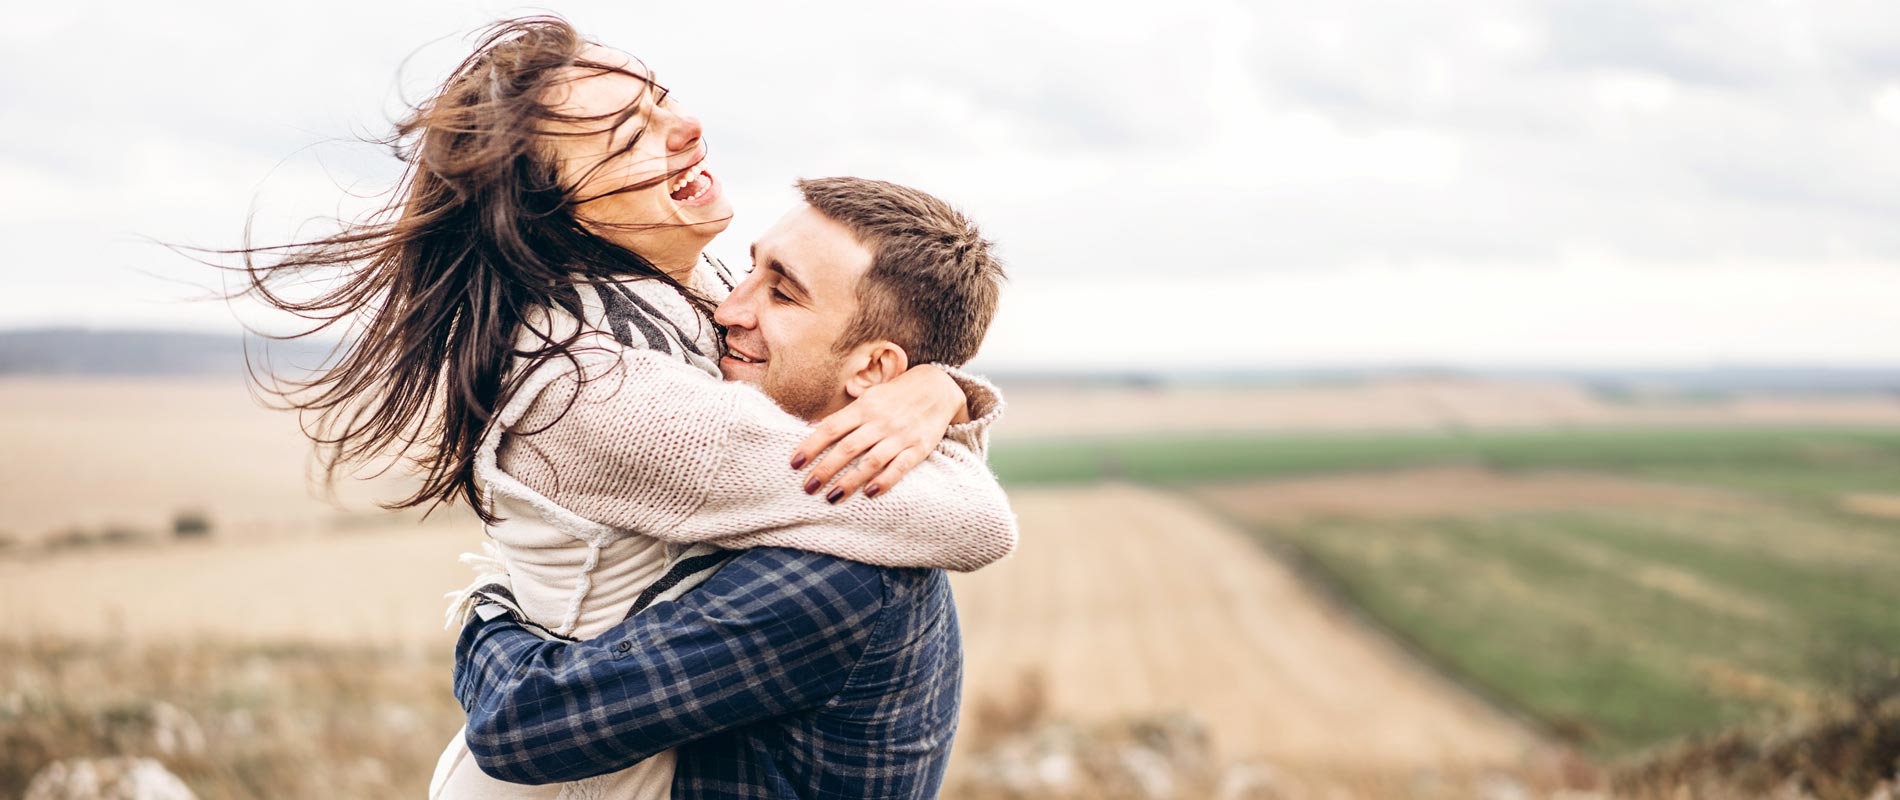 Couple embracing in a field on Valentine's Day